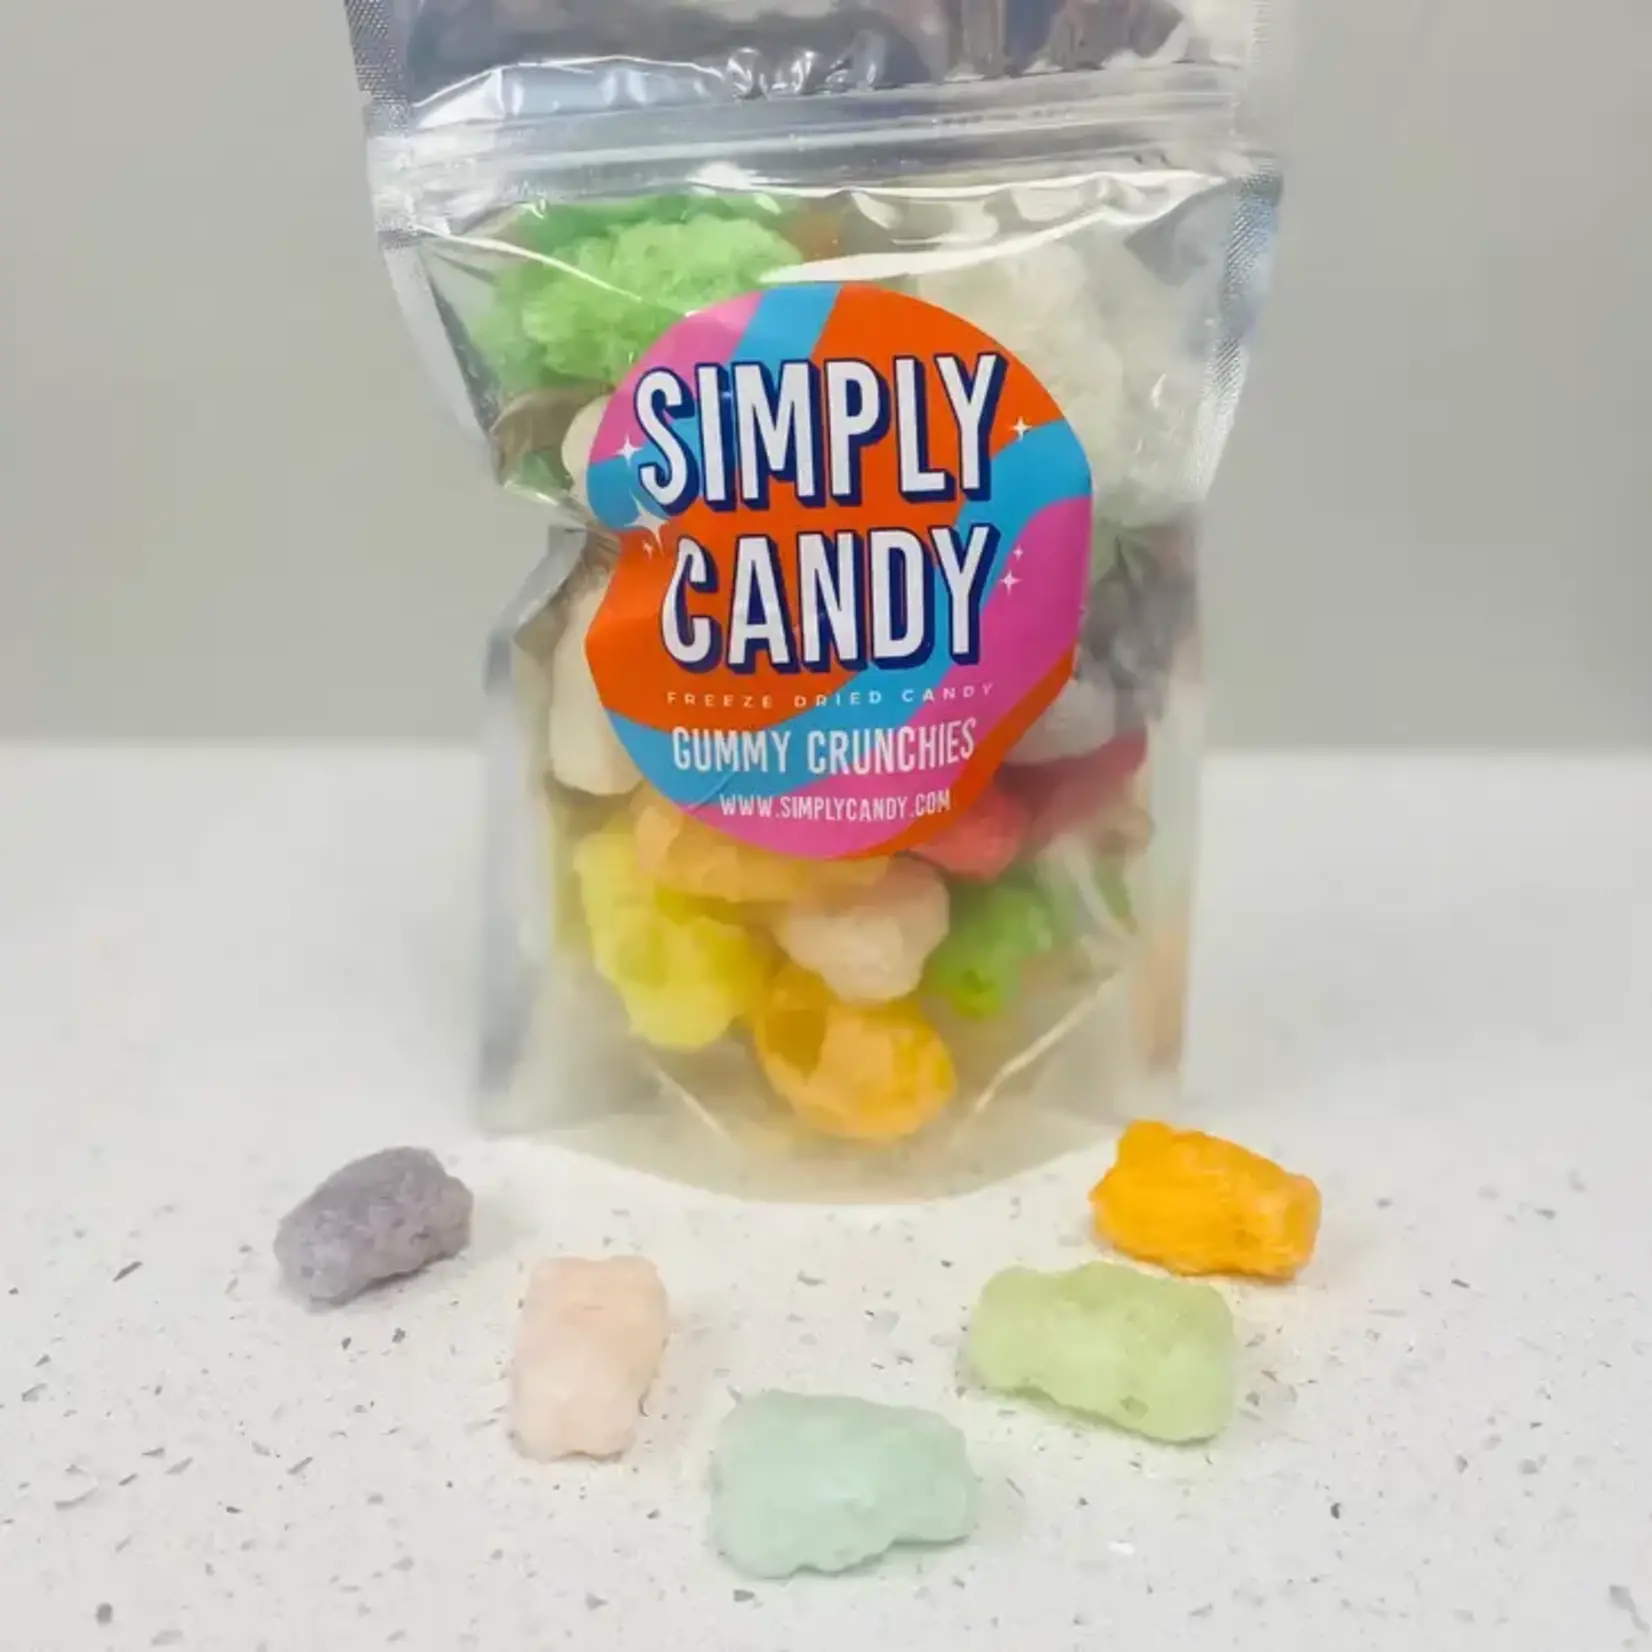 SIMPLY CANDY GUMMY CRUNCHIES